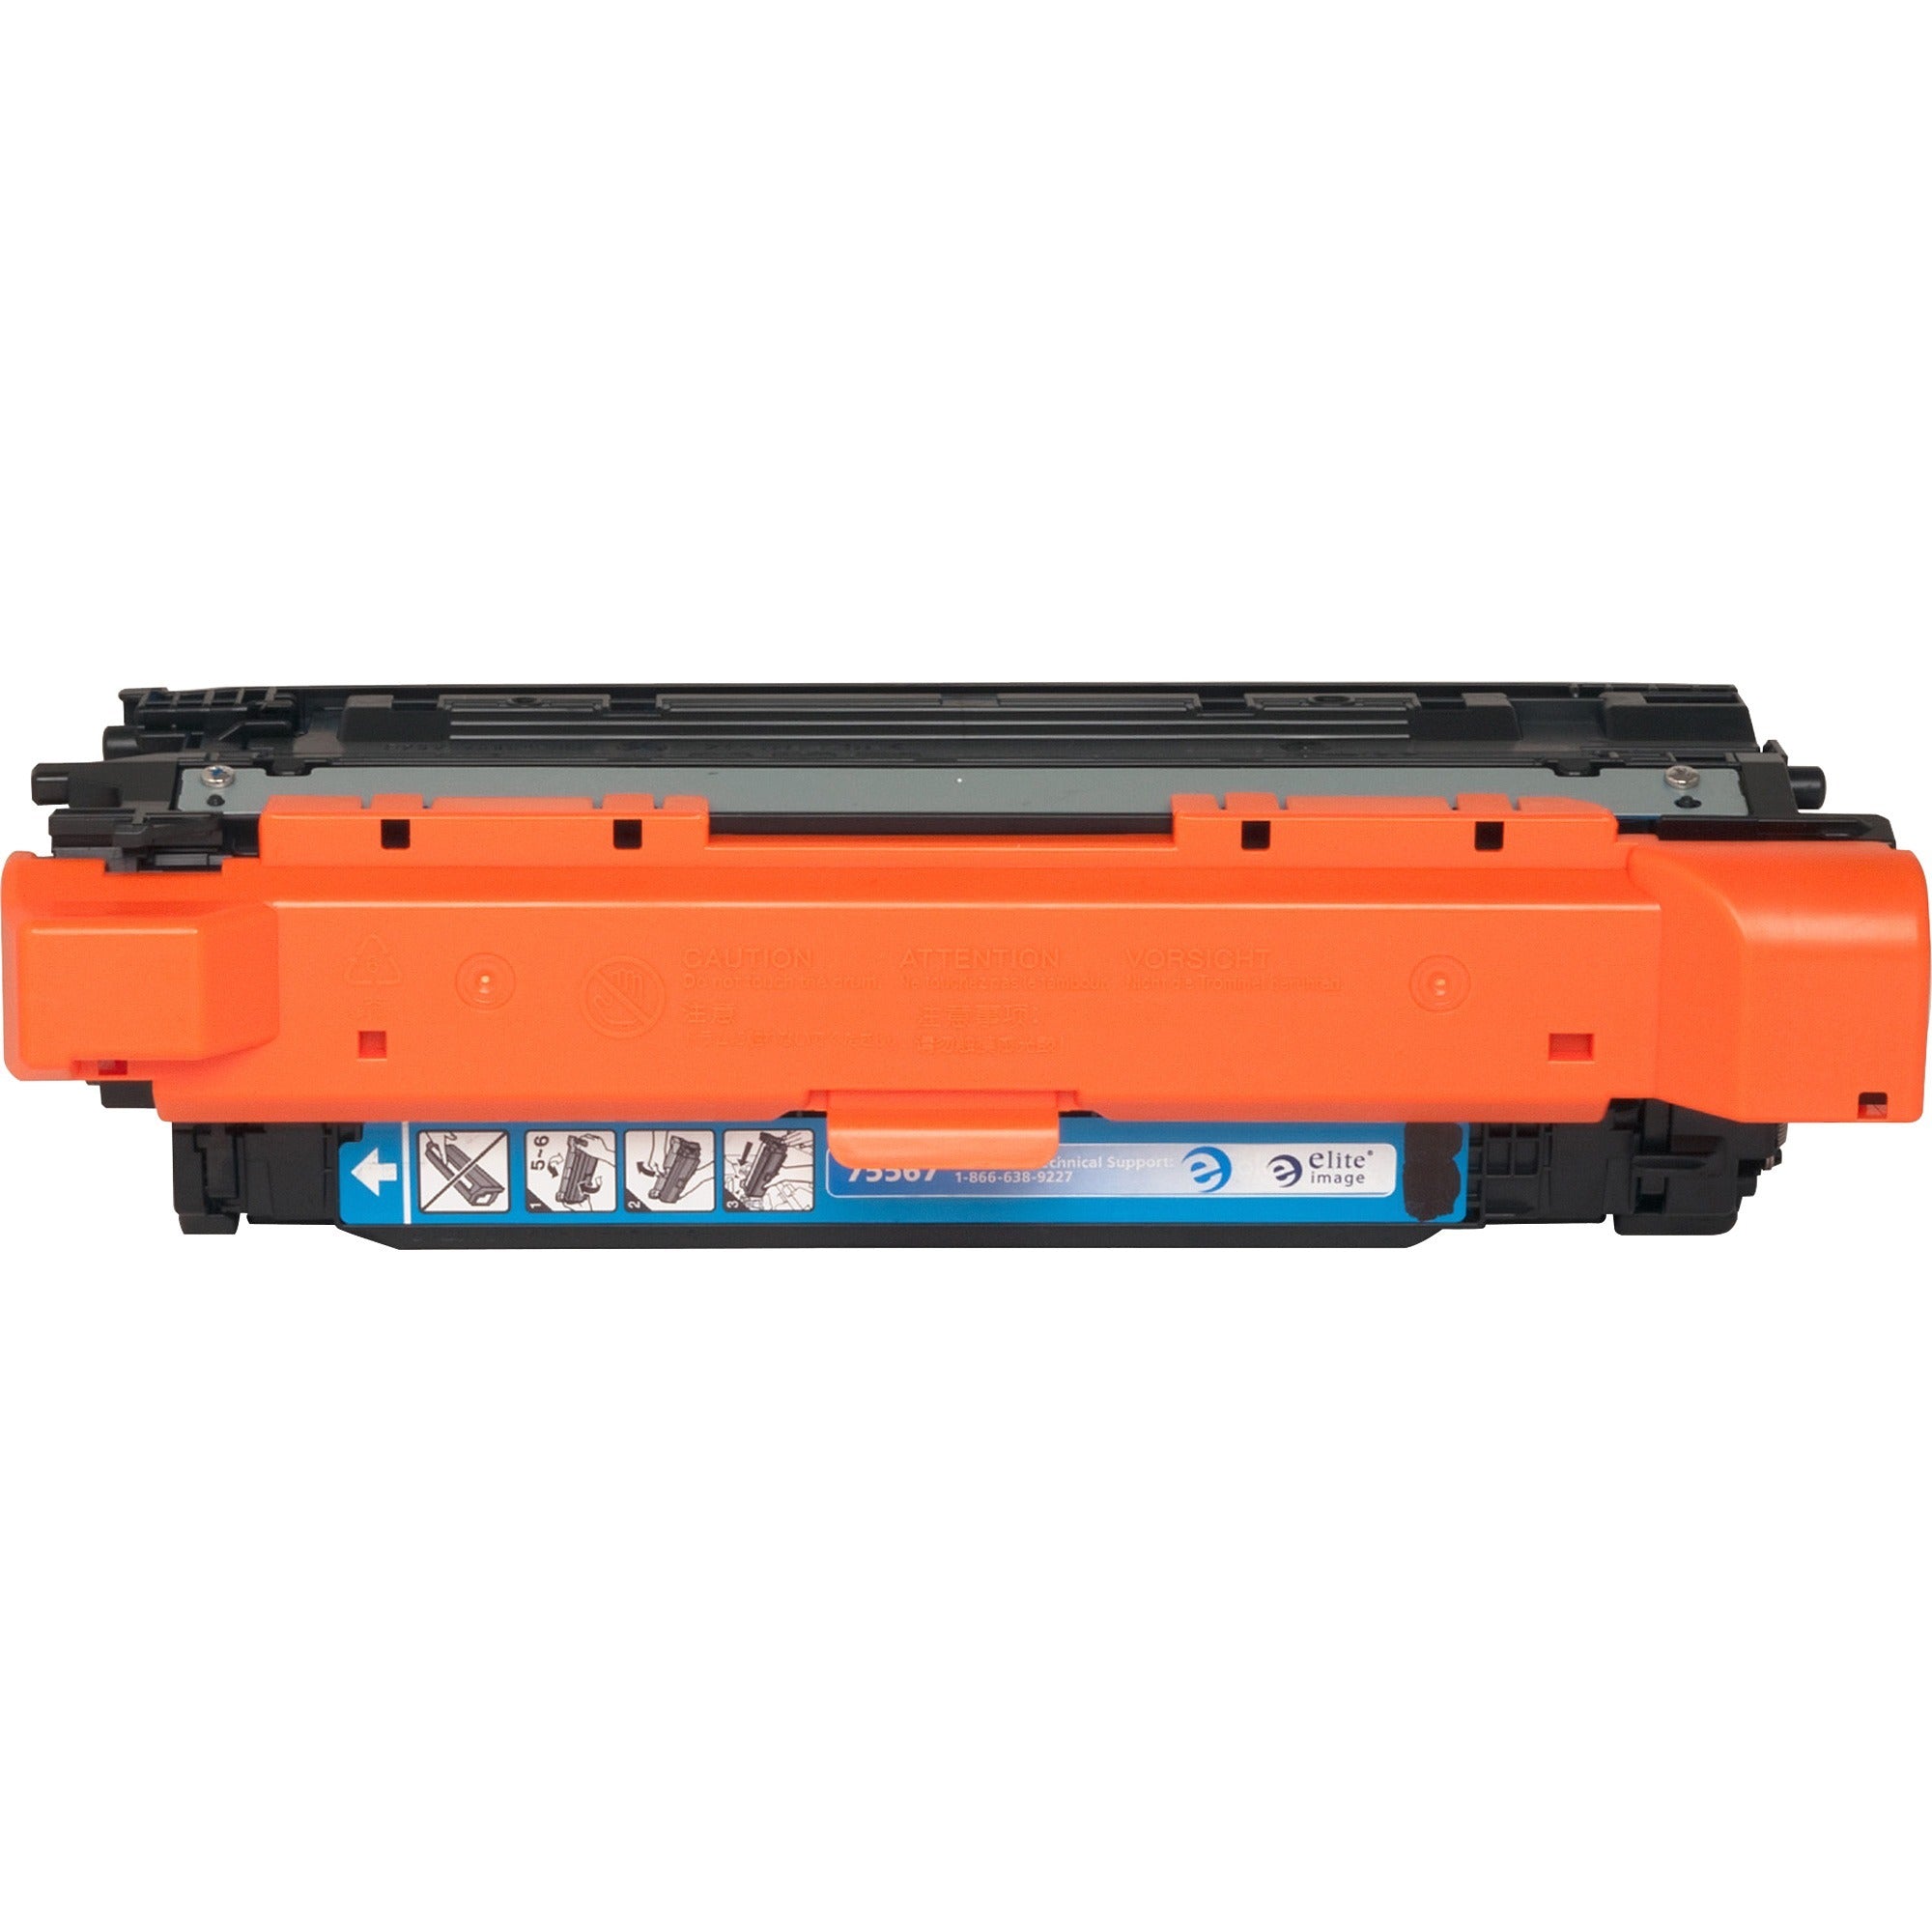 Elite Image Remanufactured Laser Toner Cartridge - Alternative for HP 504A (CE251A) - Cyan - 1 Each - 7000 Pages - 2